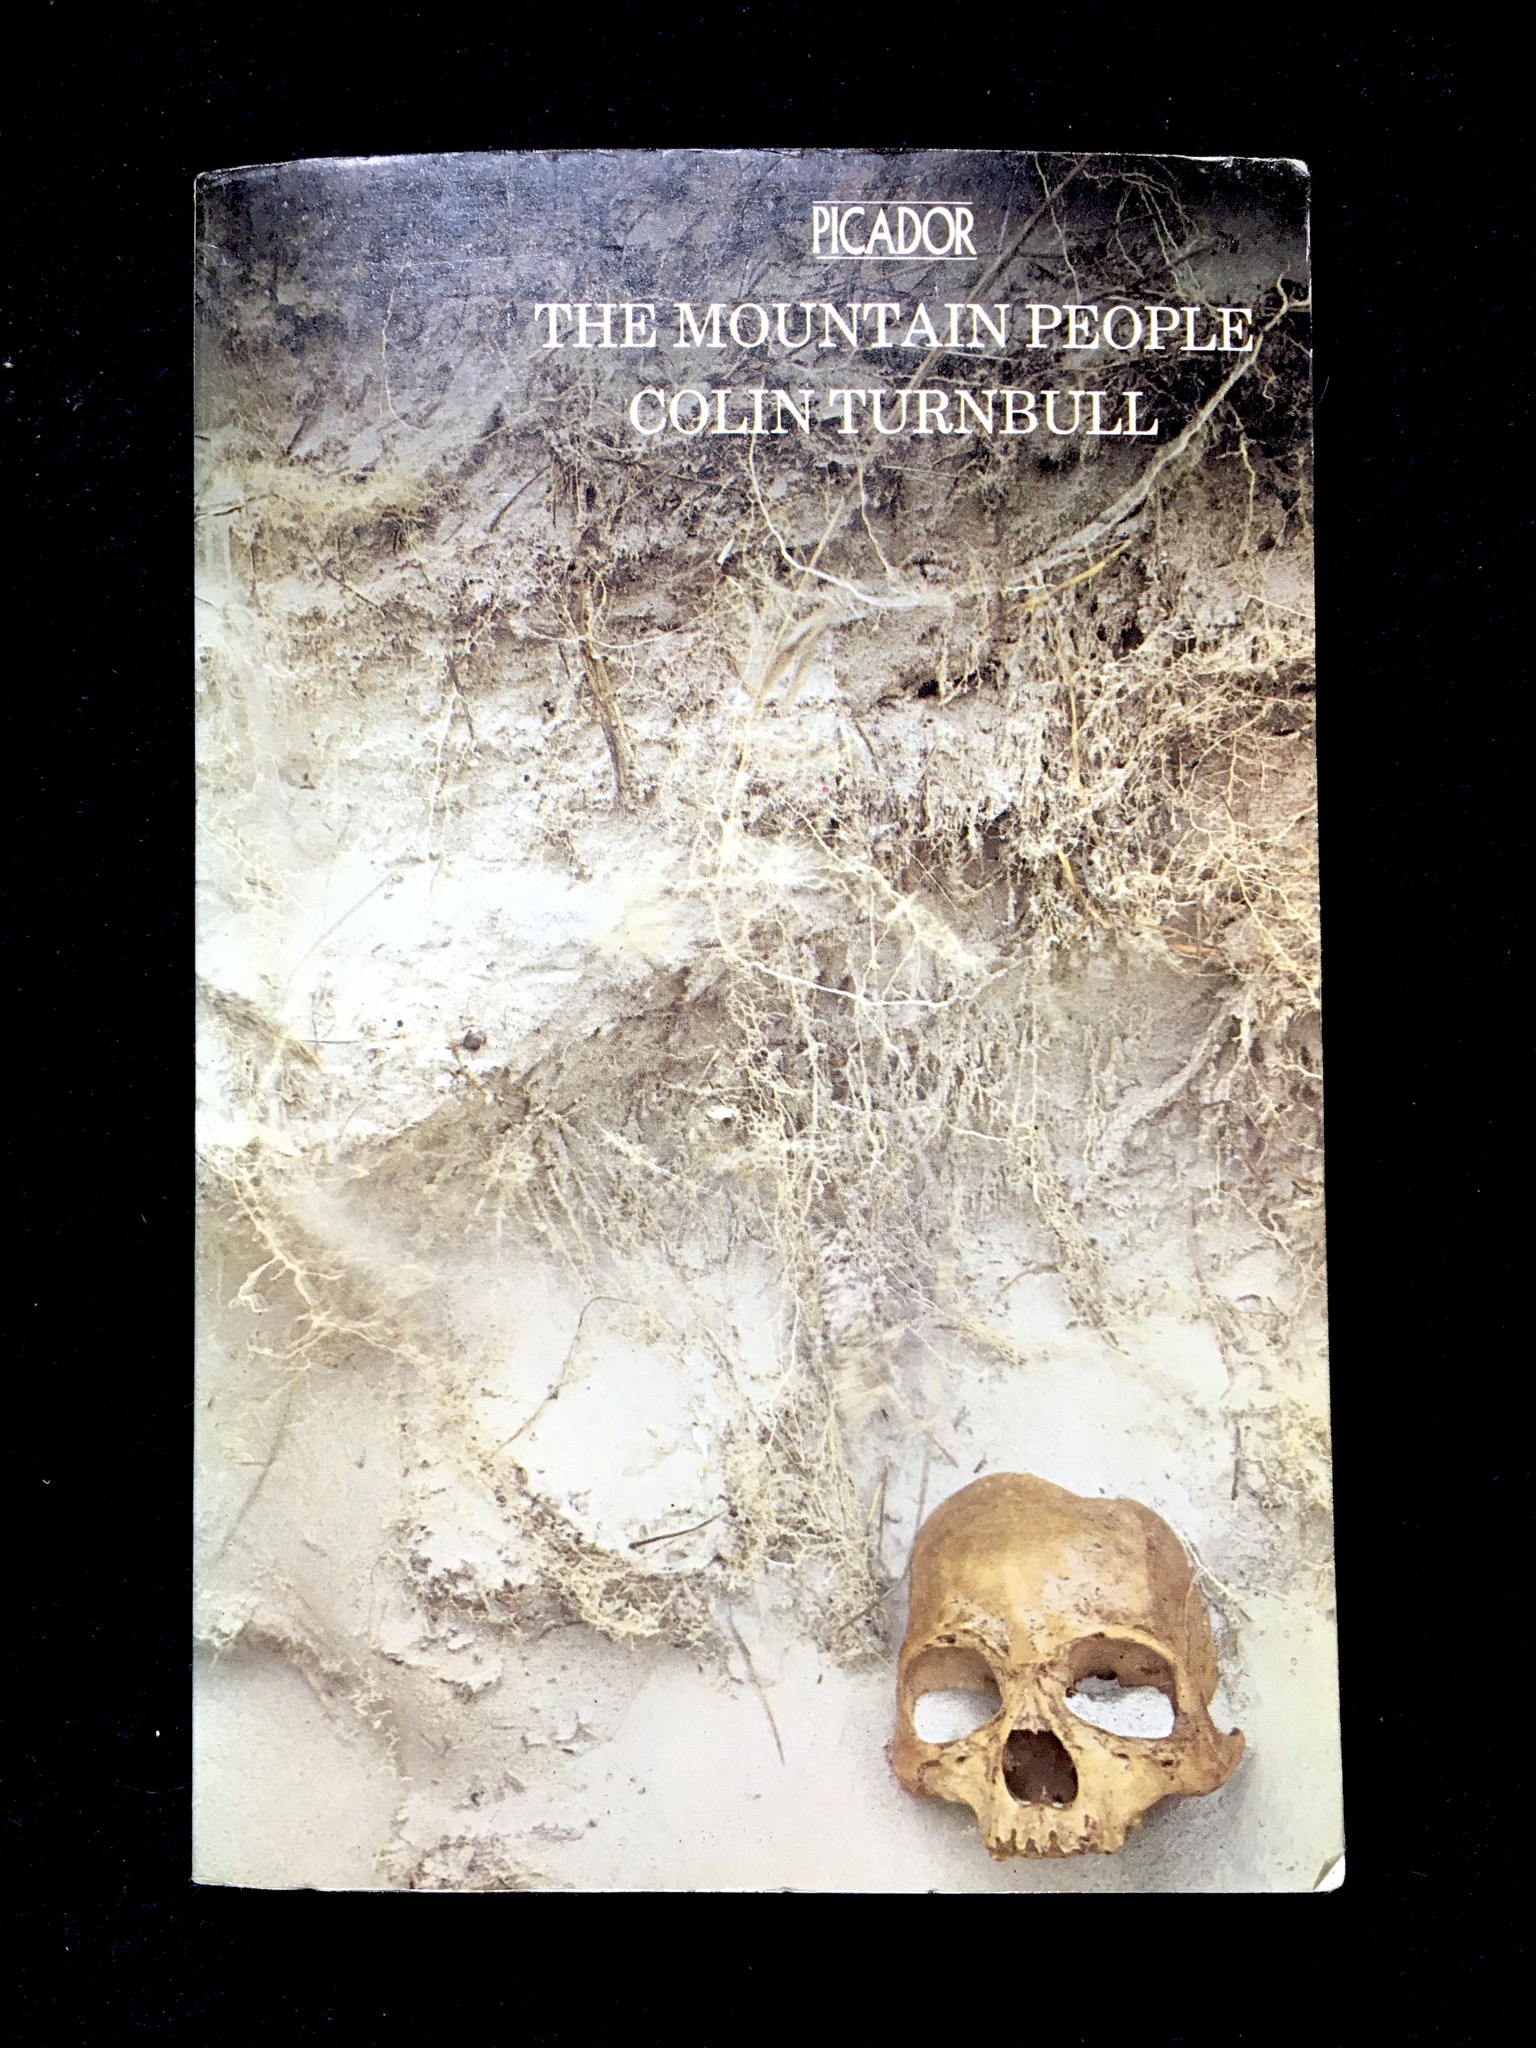 The Mountain People by Colin Turnbull